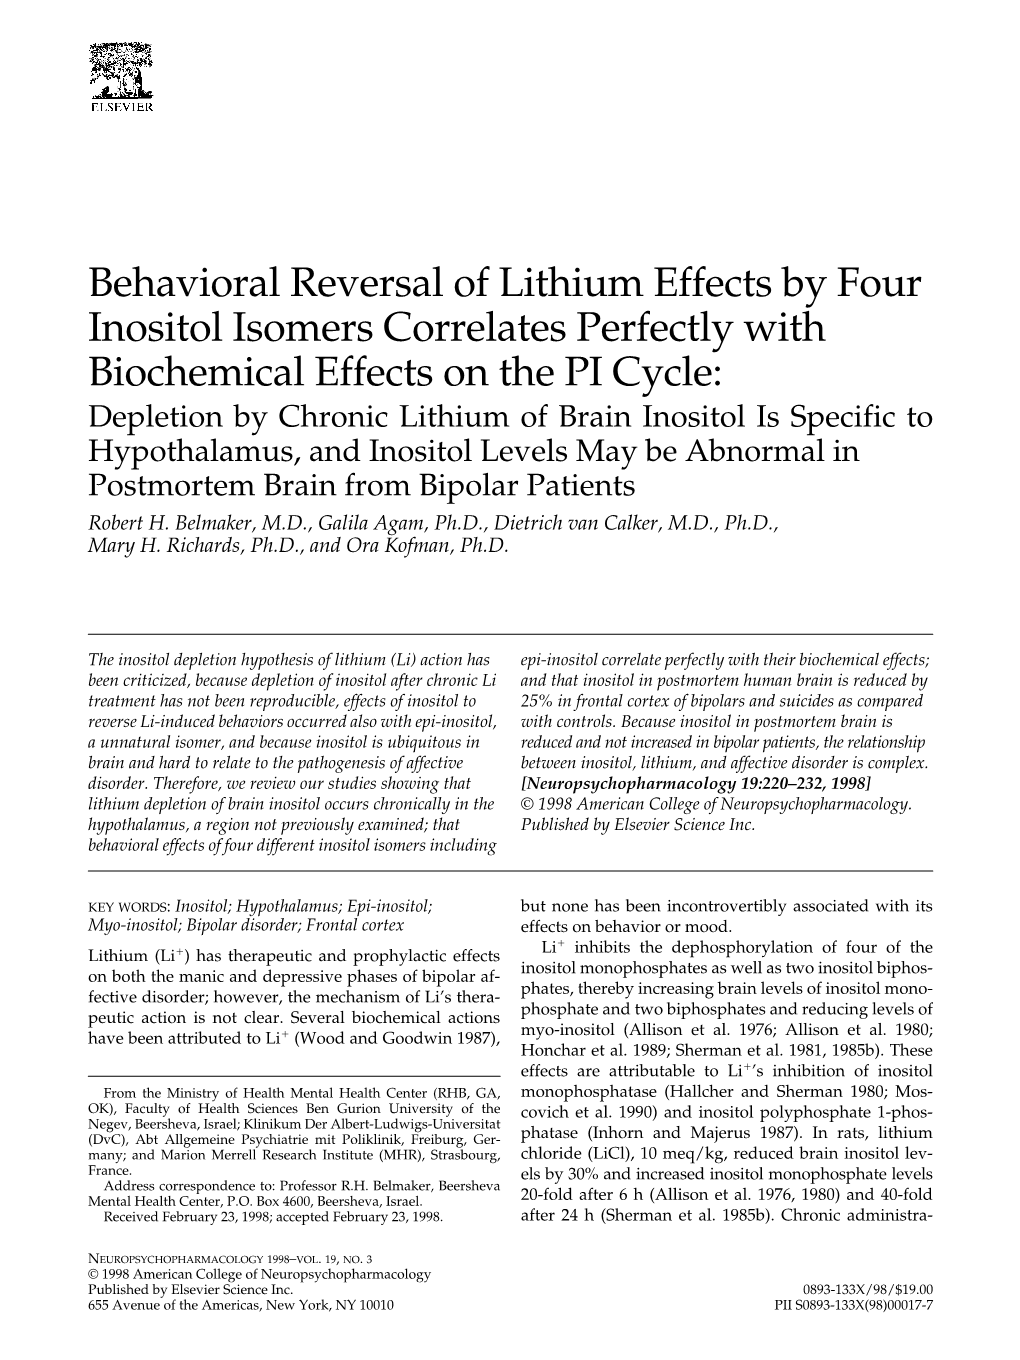 Behavioral Reversal of Lithium Effects by Four Inositol Isomers Correlates